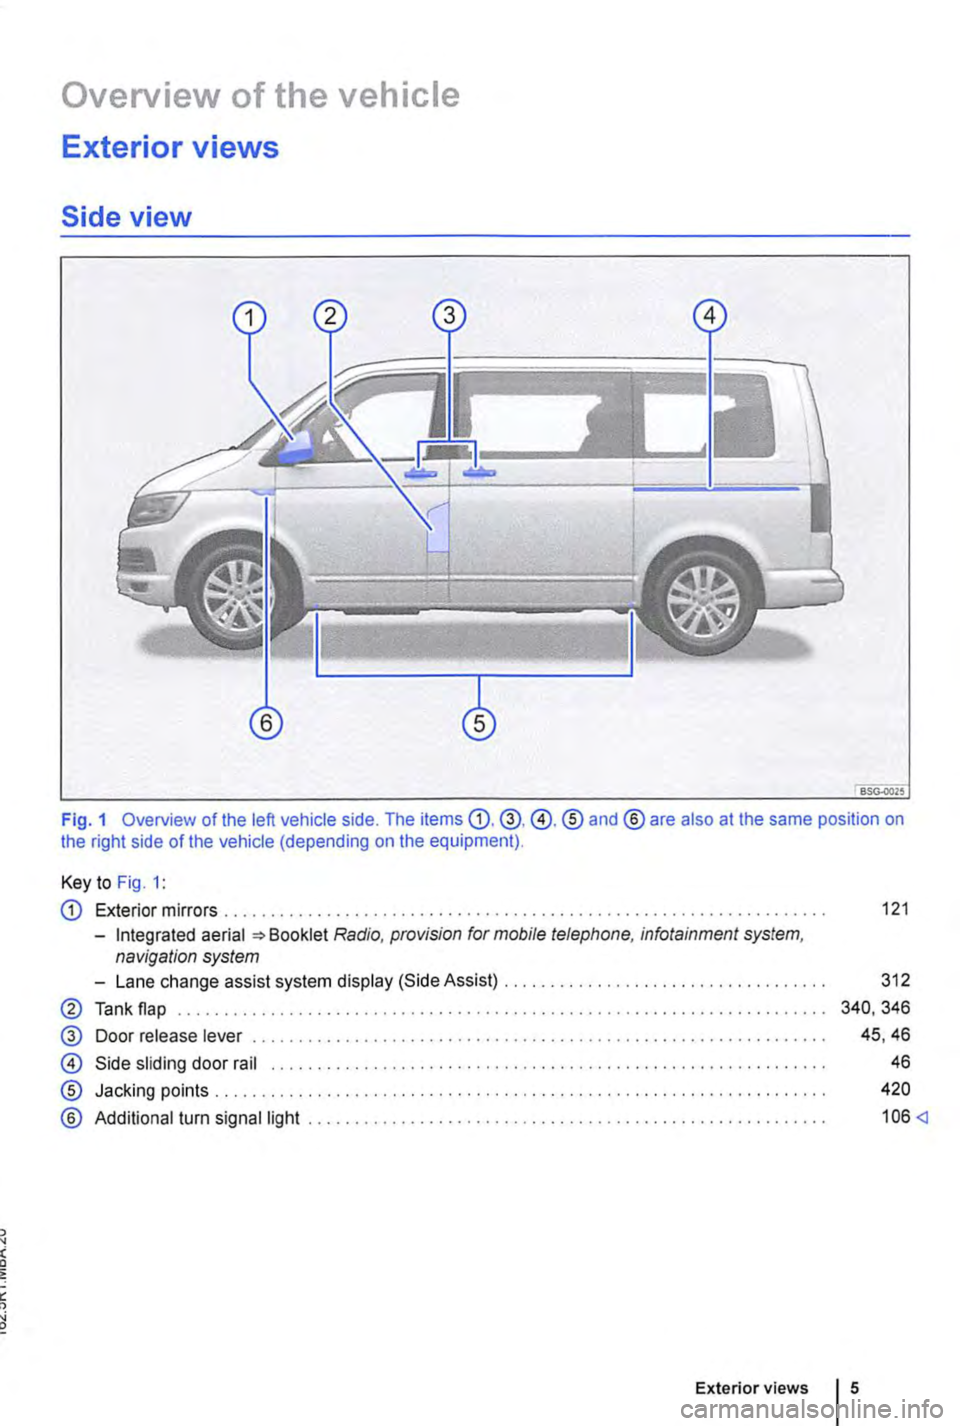 VOLKSWAGEN TRANSPORTER 2019  Owners Manual Overview of the vehicle 
Exterior views 
Side view 
Fig. 1 Overview of the left vehicle side. The items G).@,@.® and® are also at the same position on the right side of the vehicle (depending on the